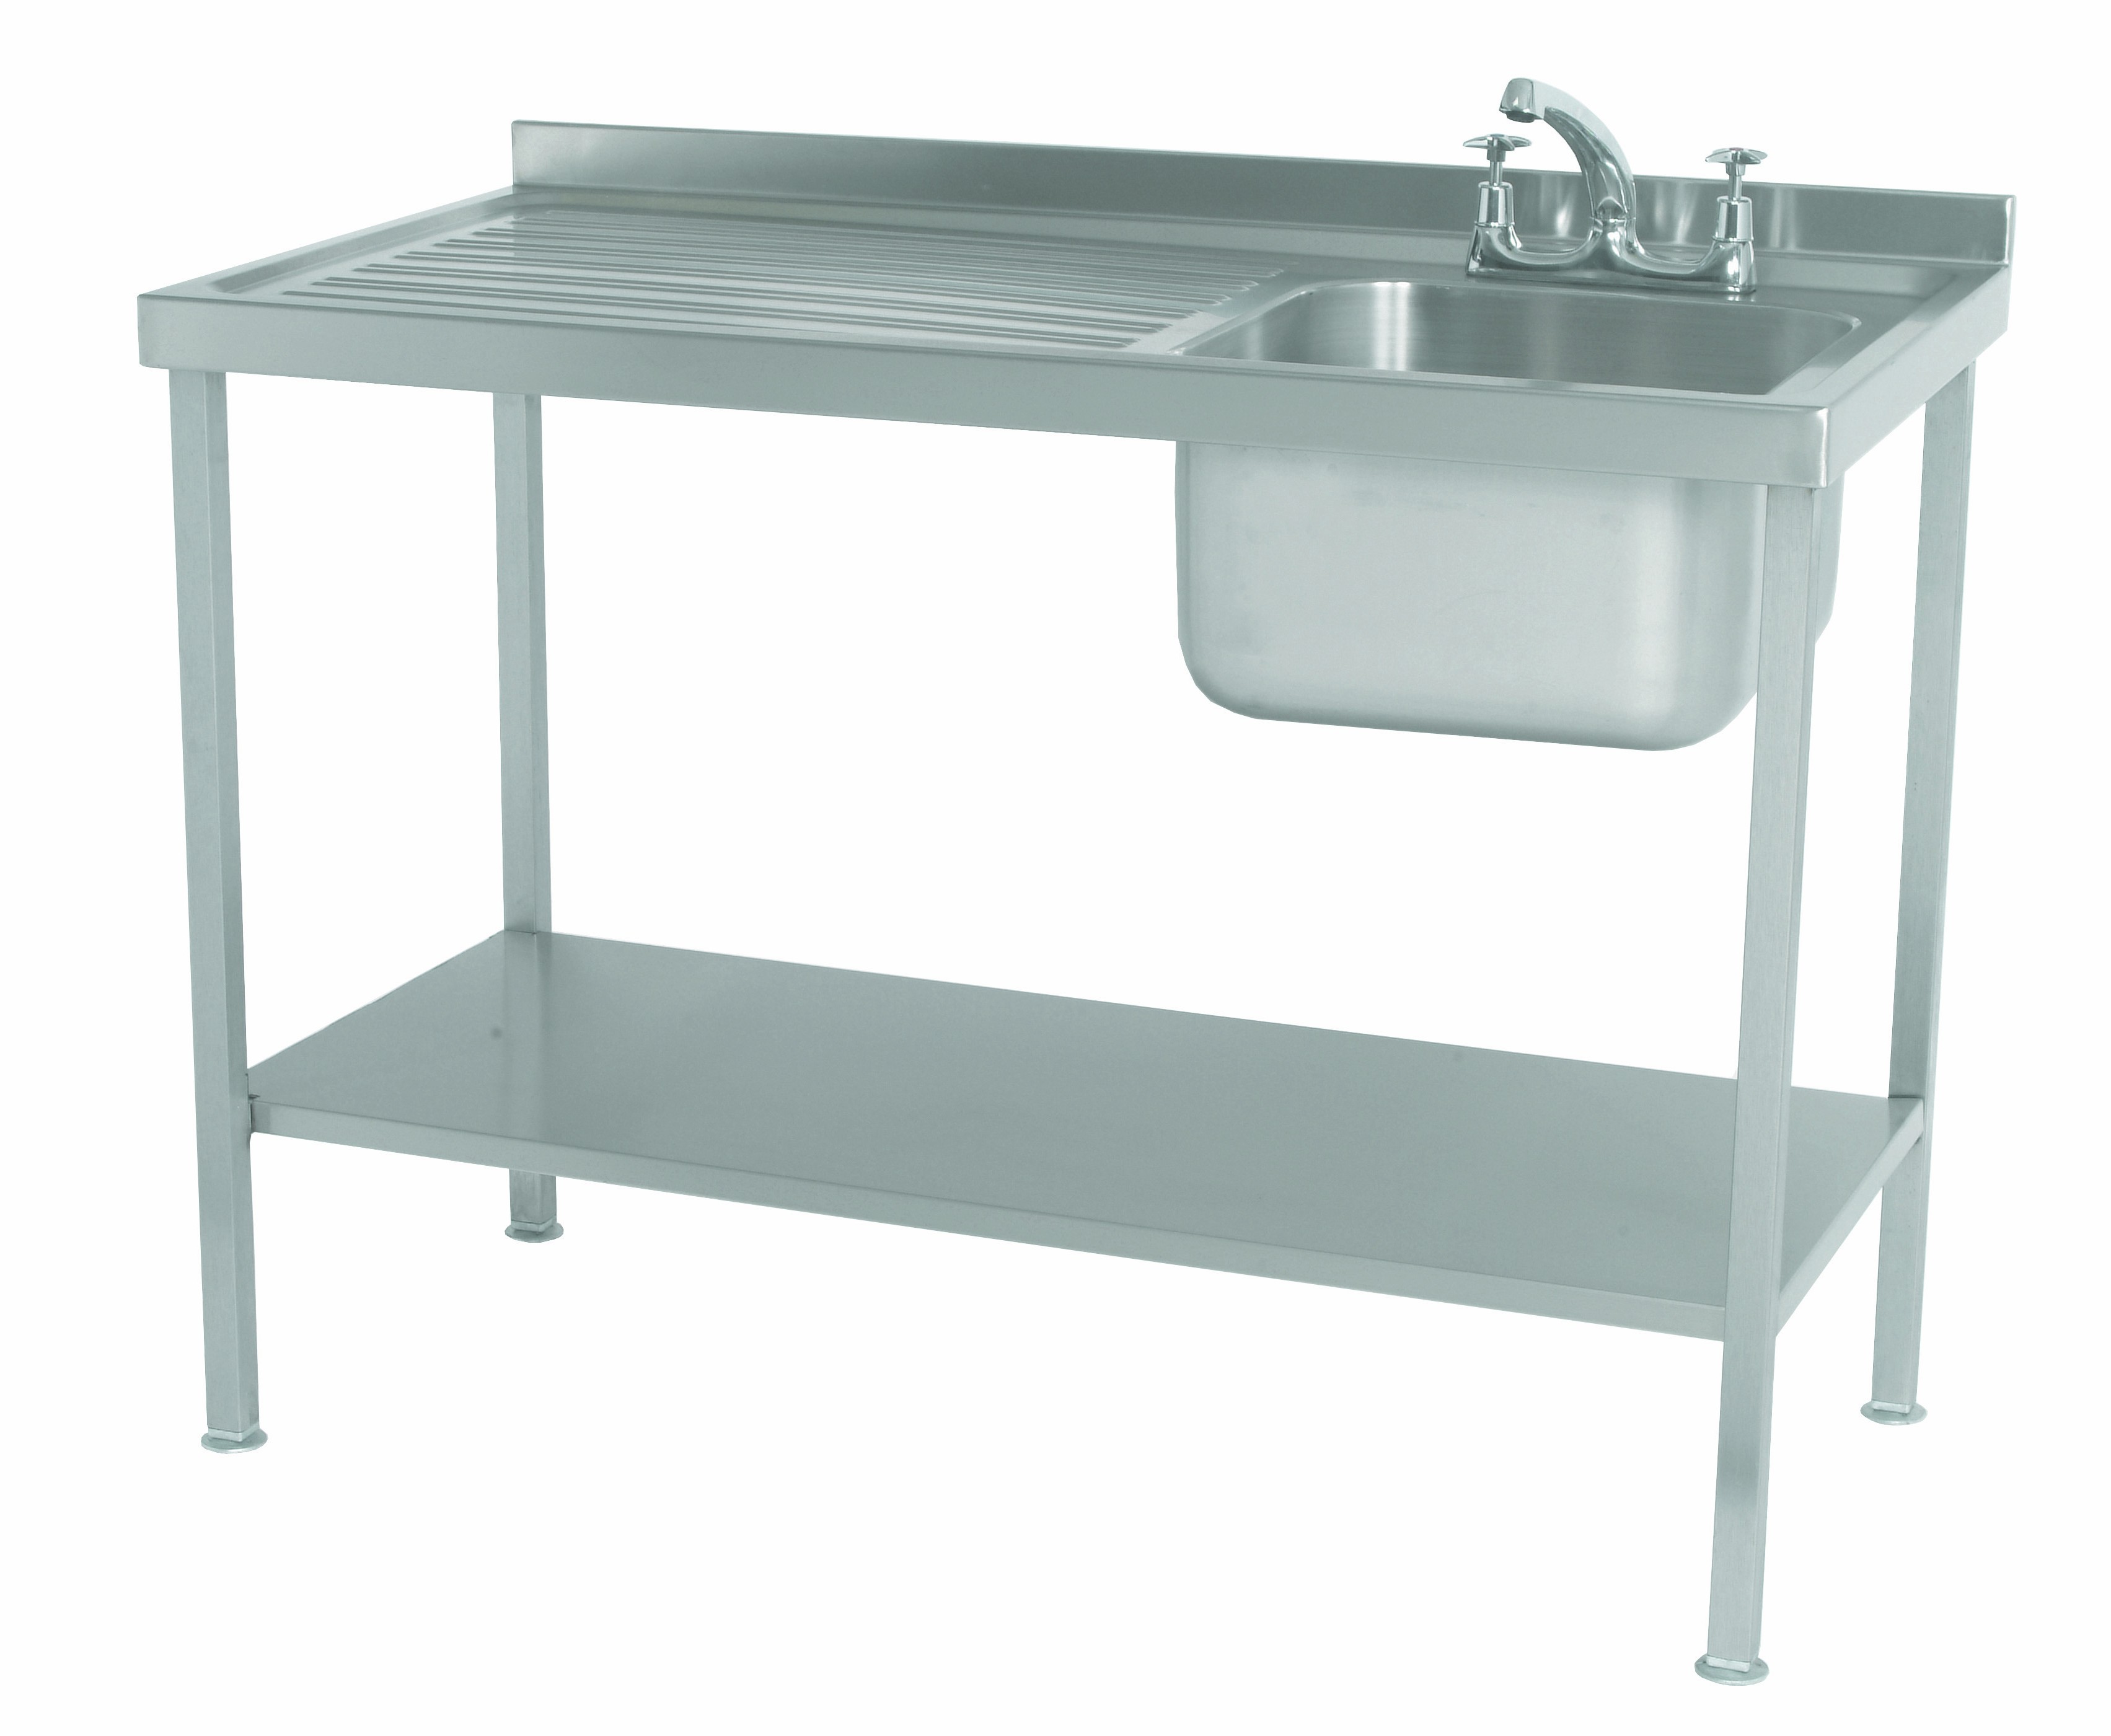 Parry SINKL - Stainless Steel Assembled Sink Single Bowl Single Drainer Left